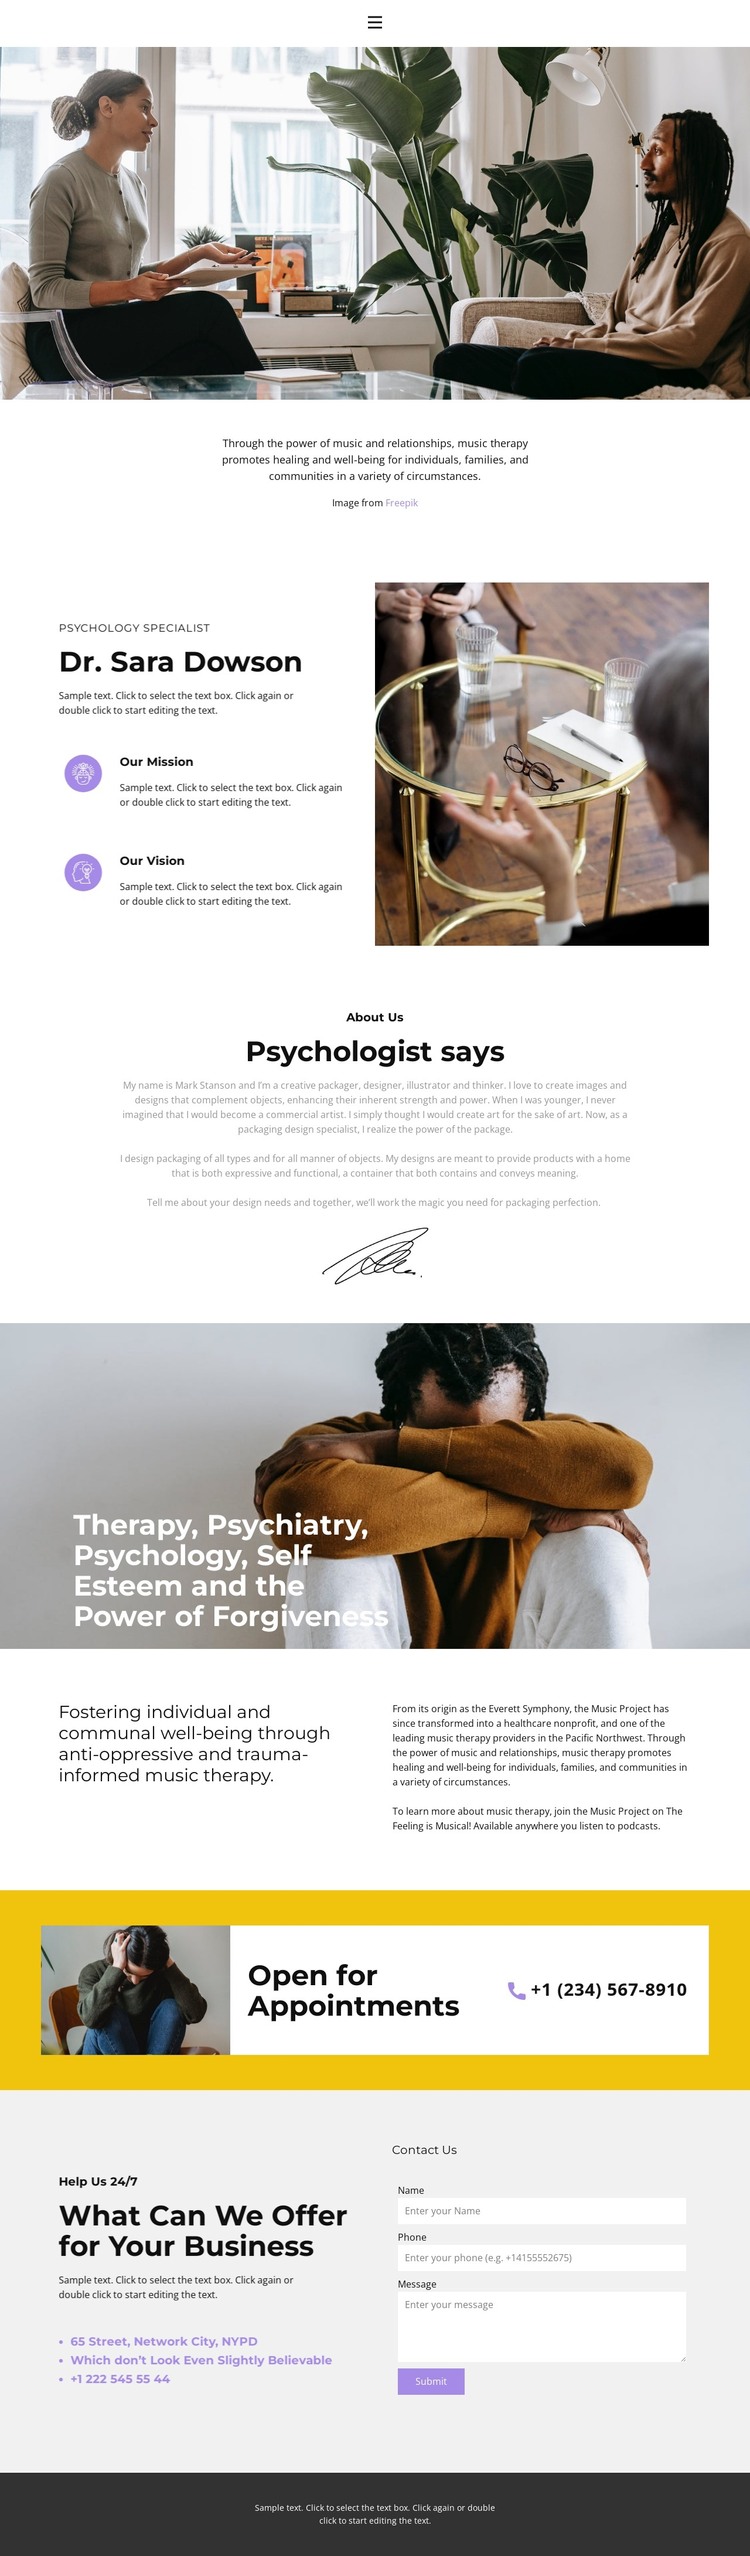 Qualified help from a psychologist Web Design